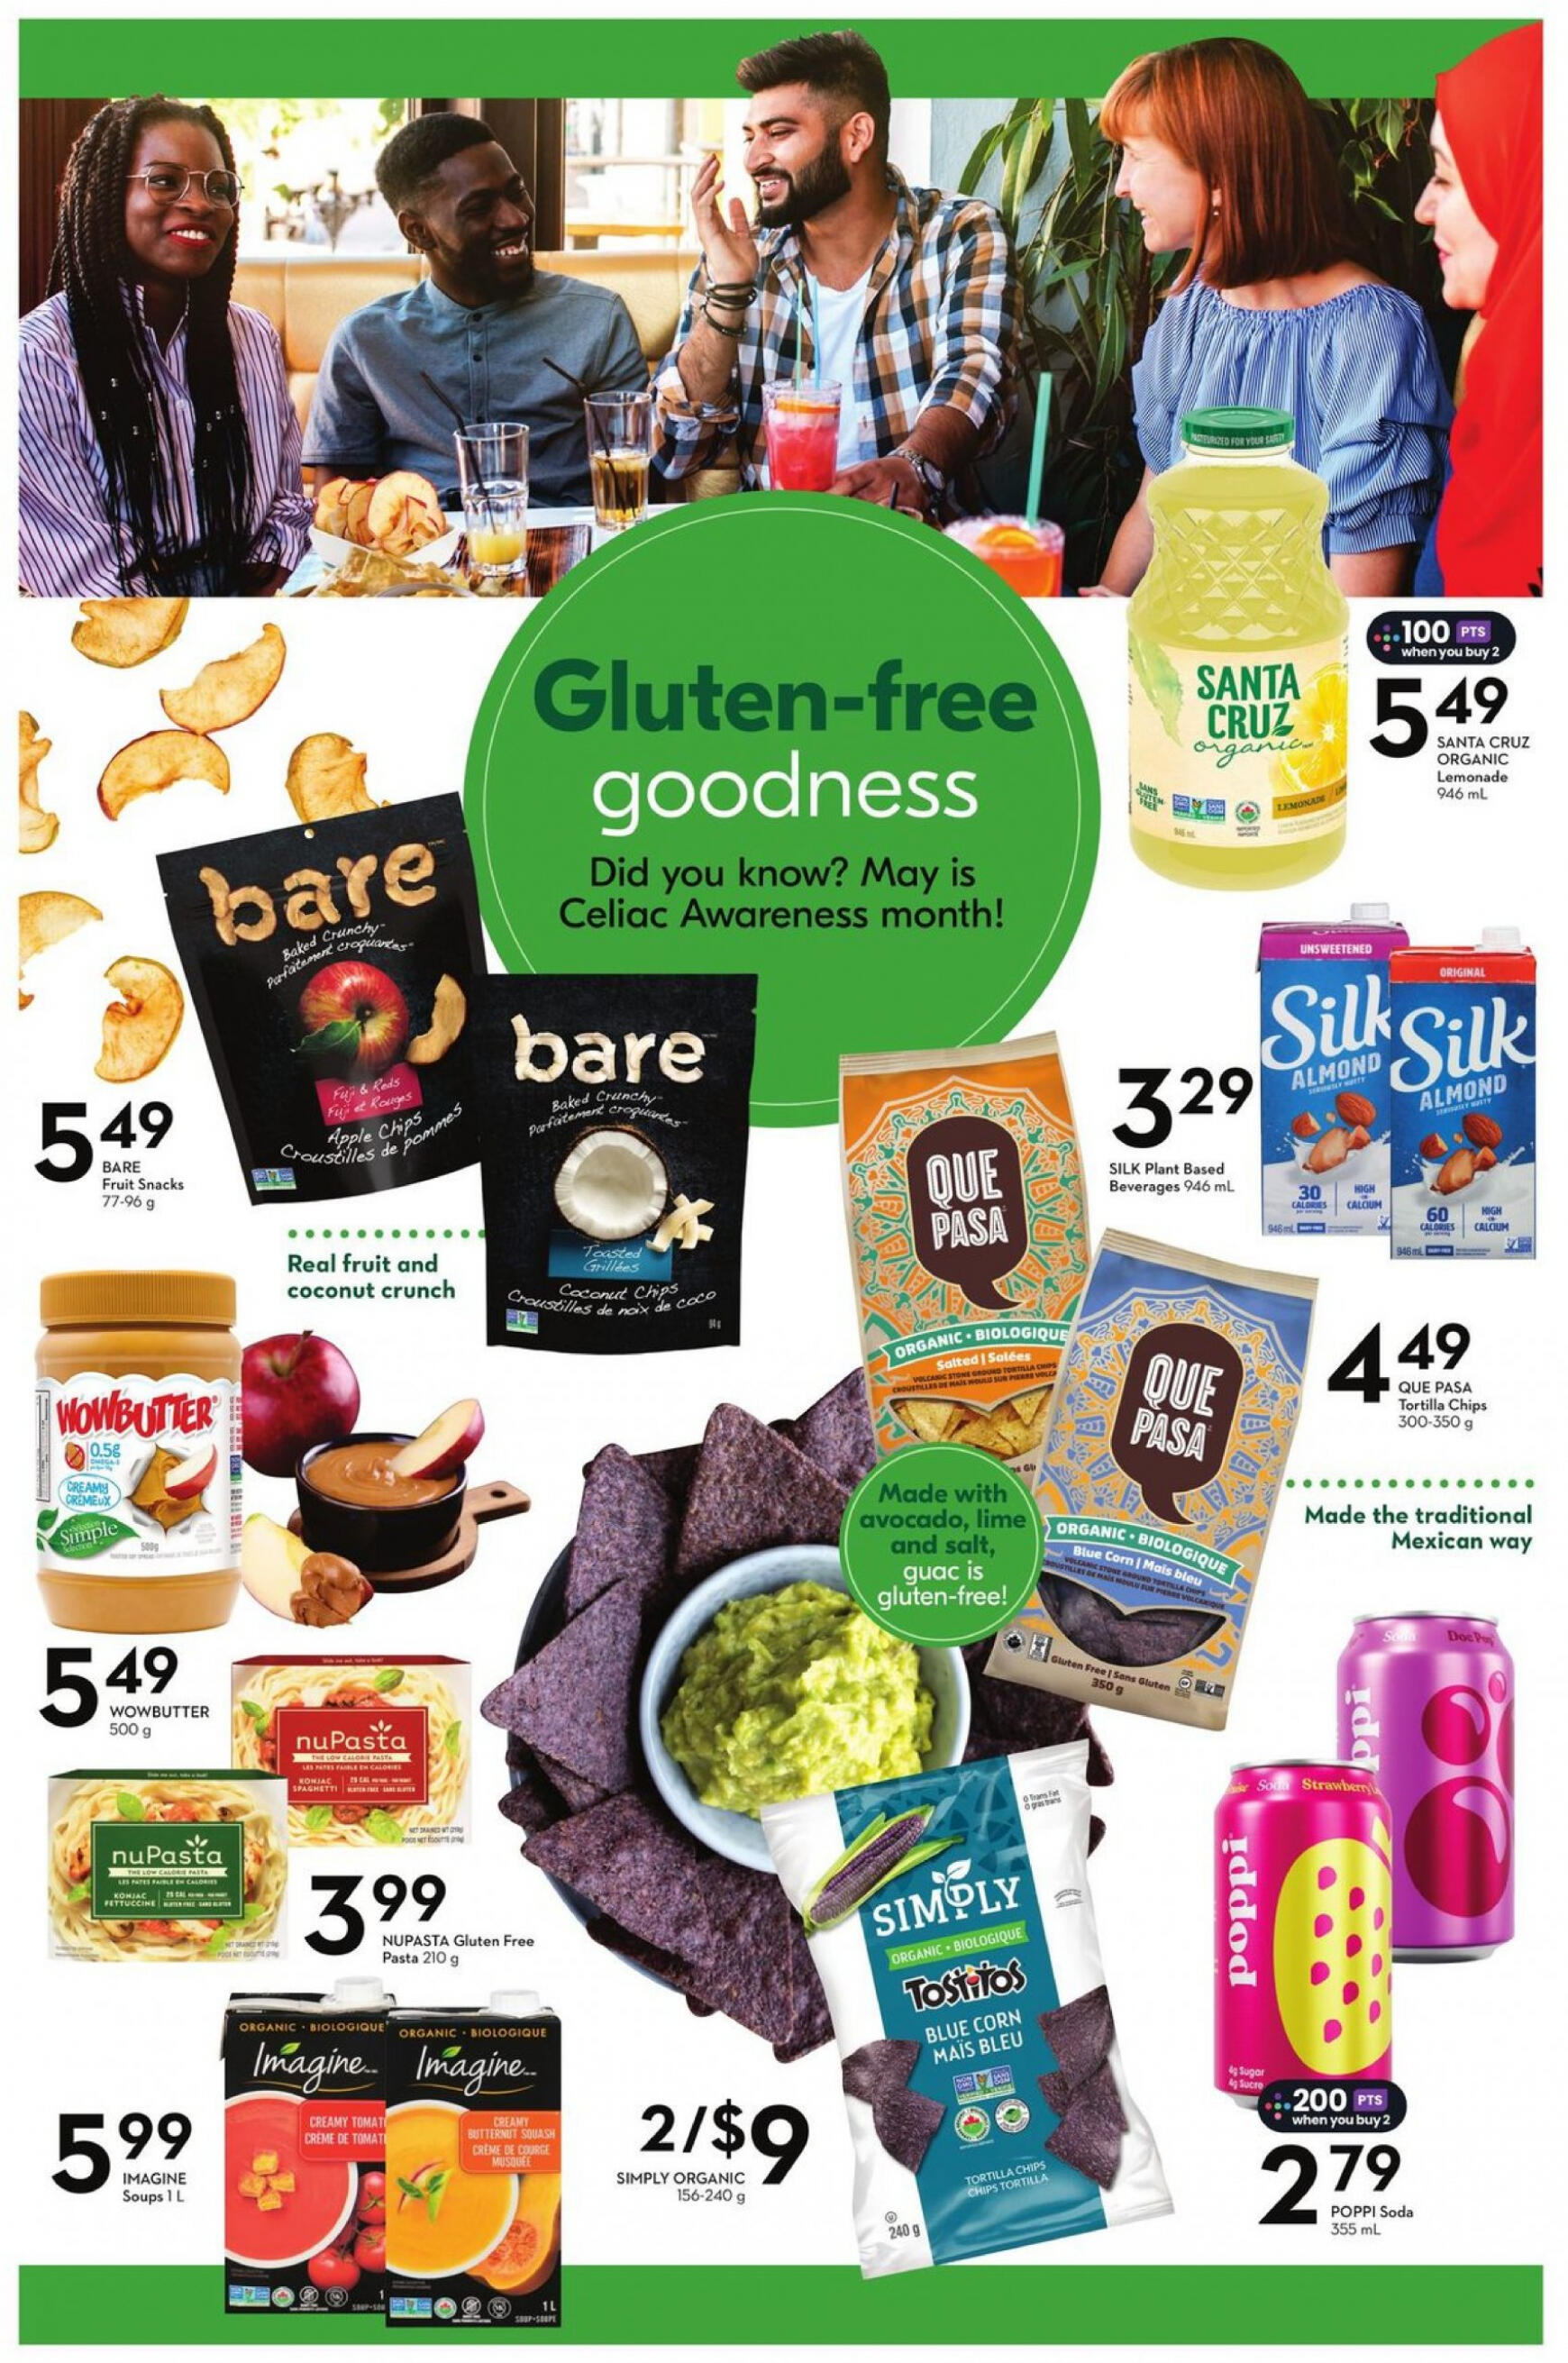 sobeys - Sobeys - Weekly Flyer - Ontario flyer current 09.05. - 15.05. - page: 16